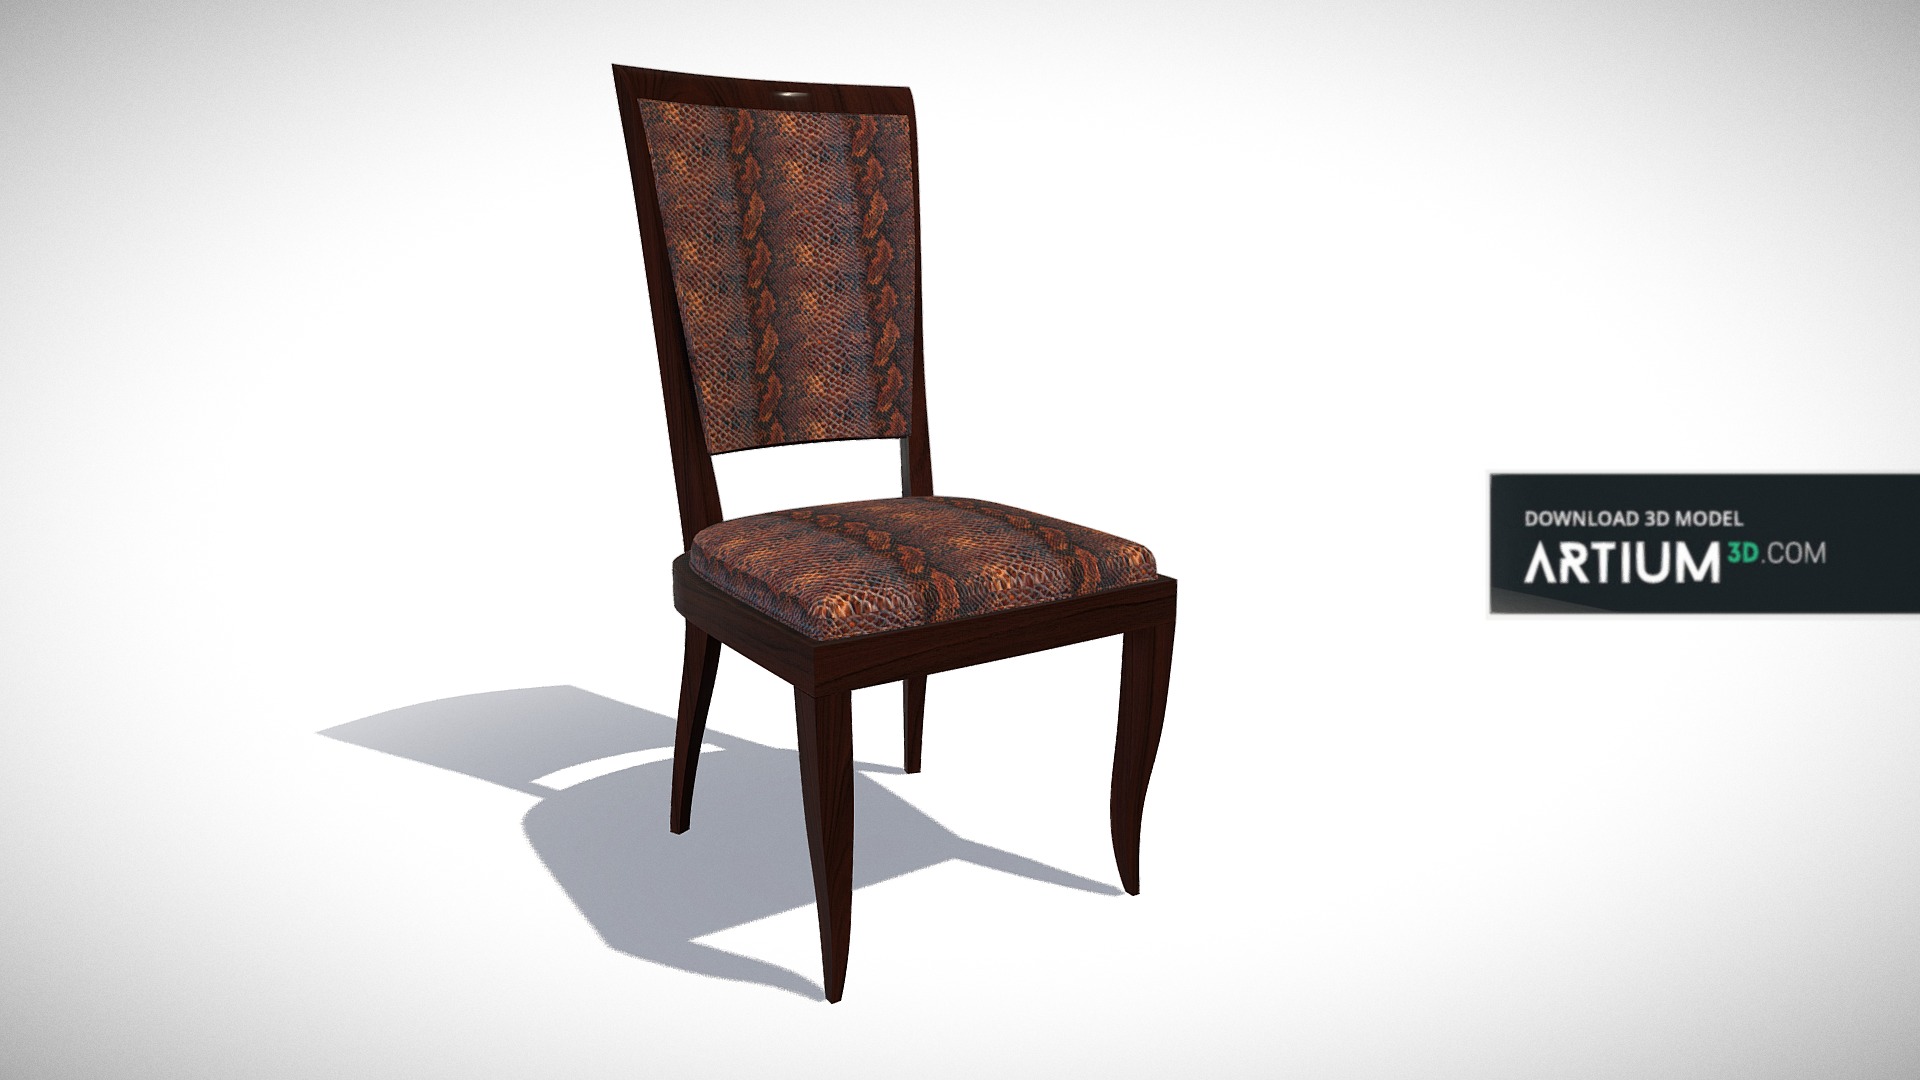 3D model Chair – Art Deco 1930 - This is a 3D model of the Chair – Art Deco 1930. The 3D model is about a chair with a cushion.